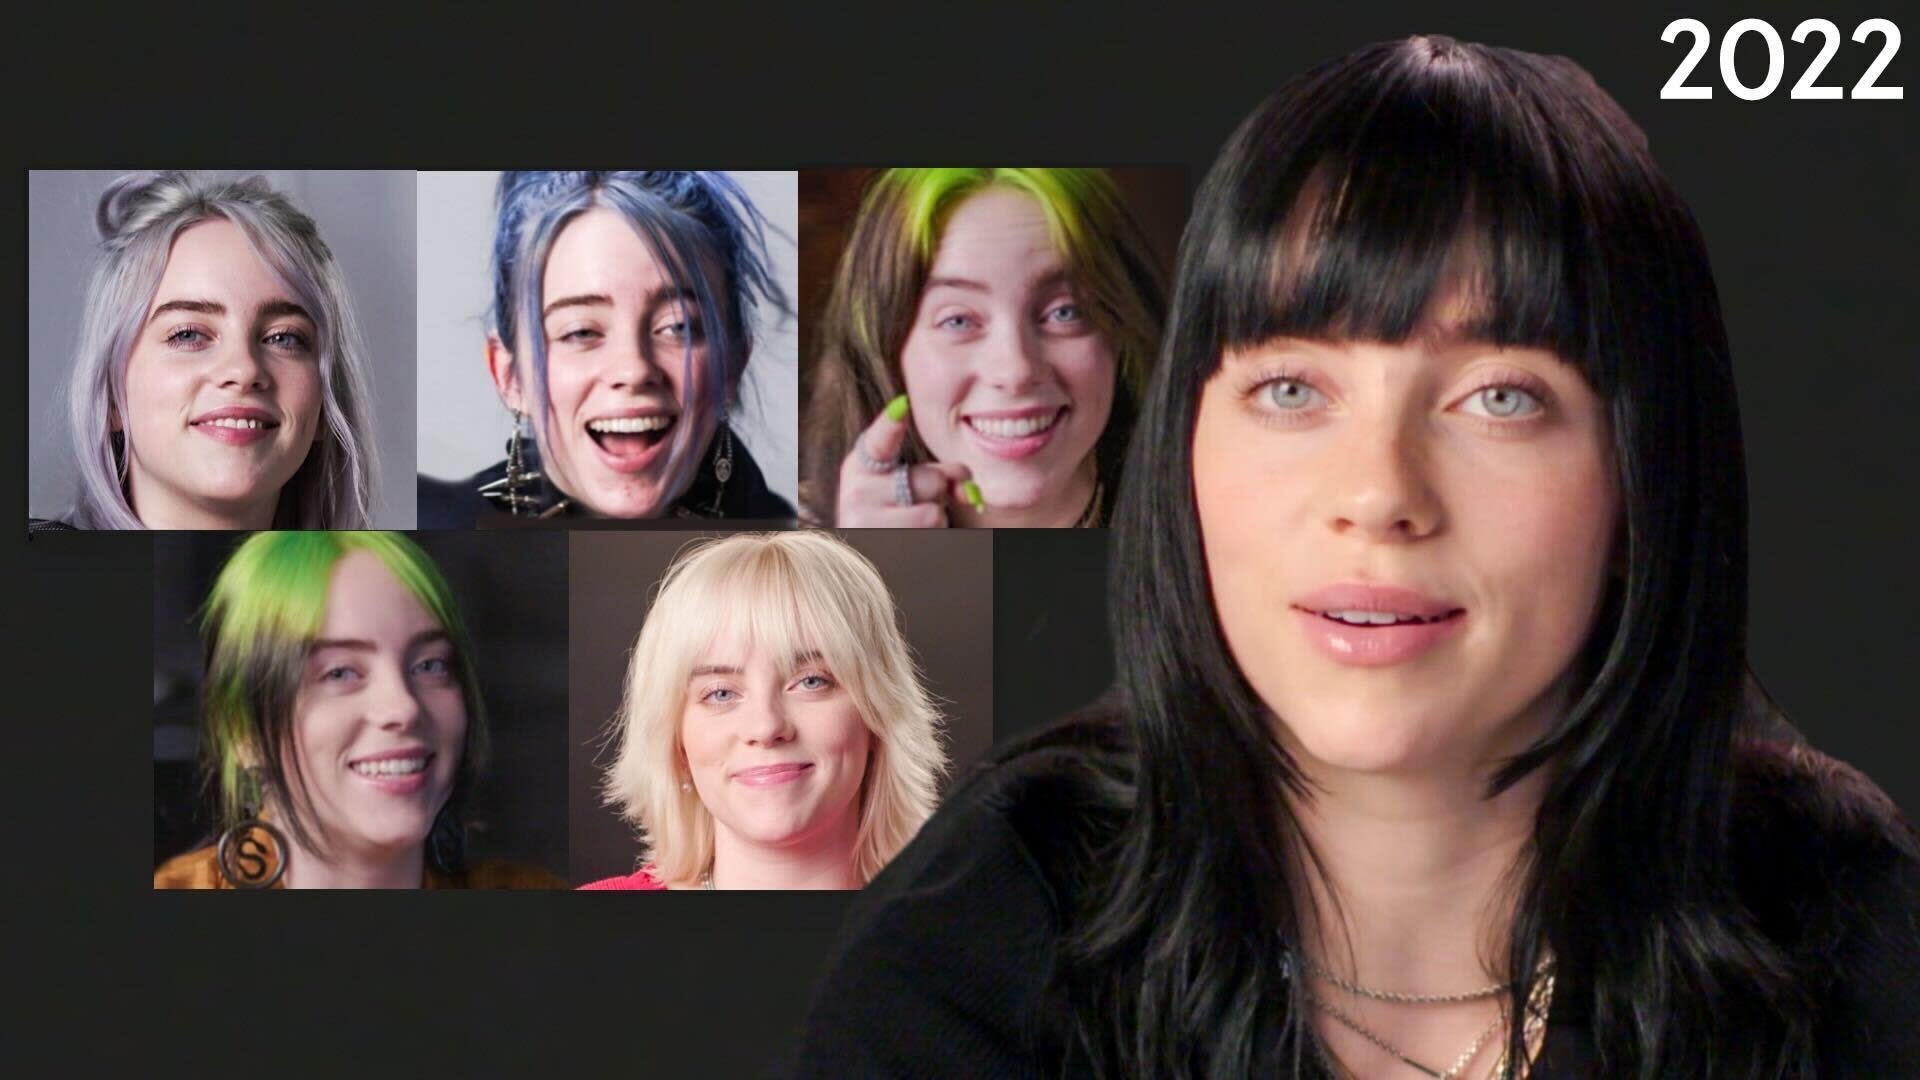 Billie Eilish says her creative process is 'different' now she is older